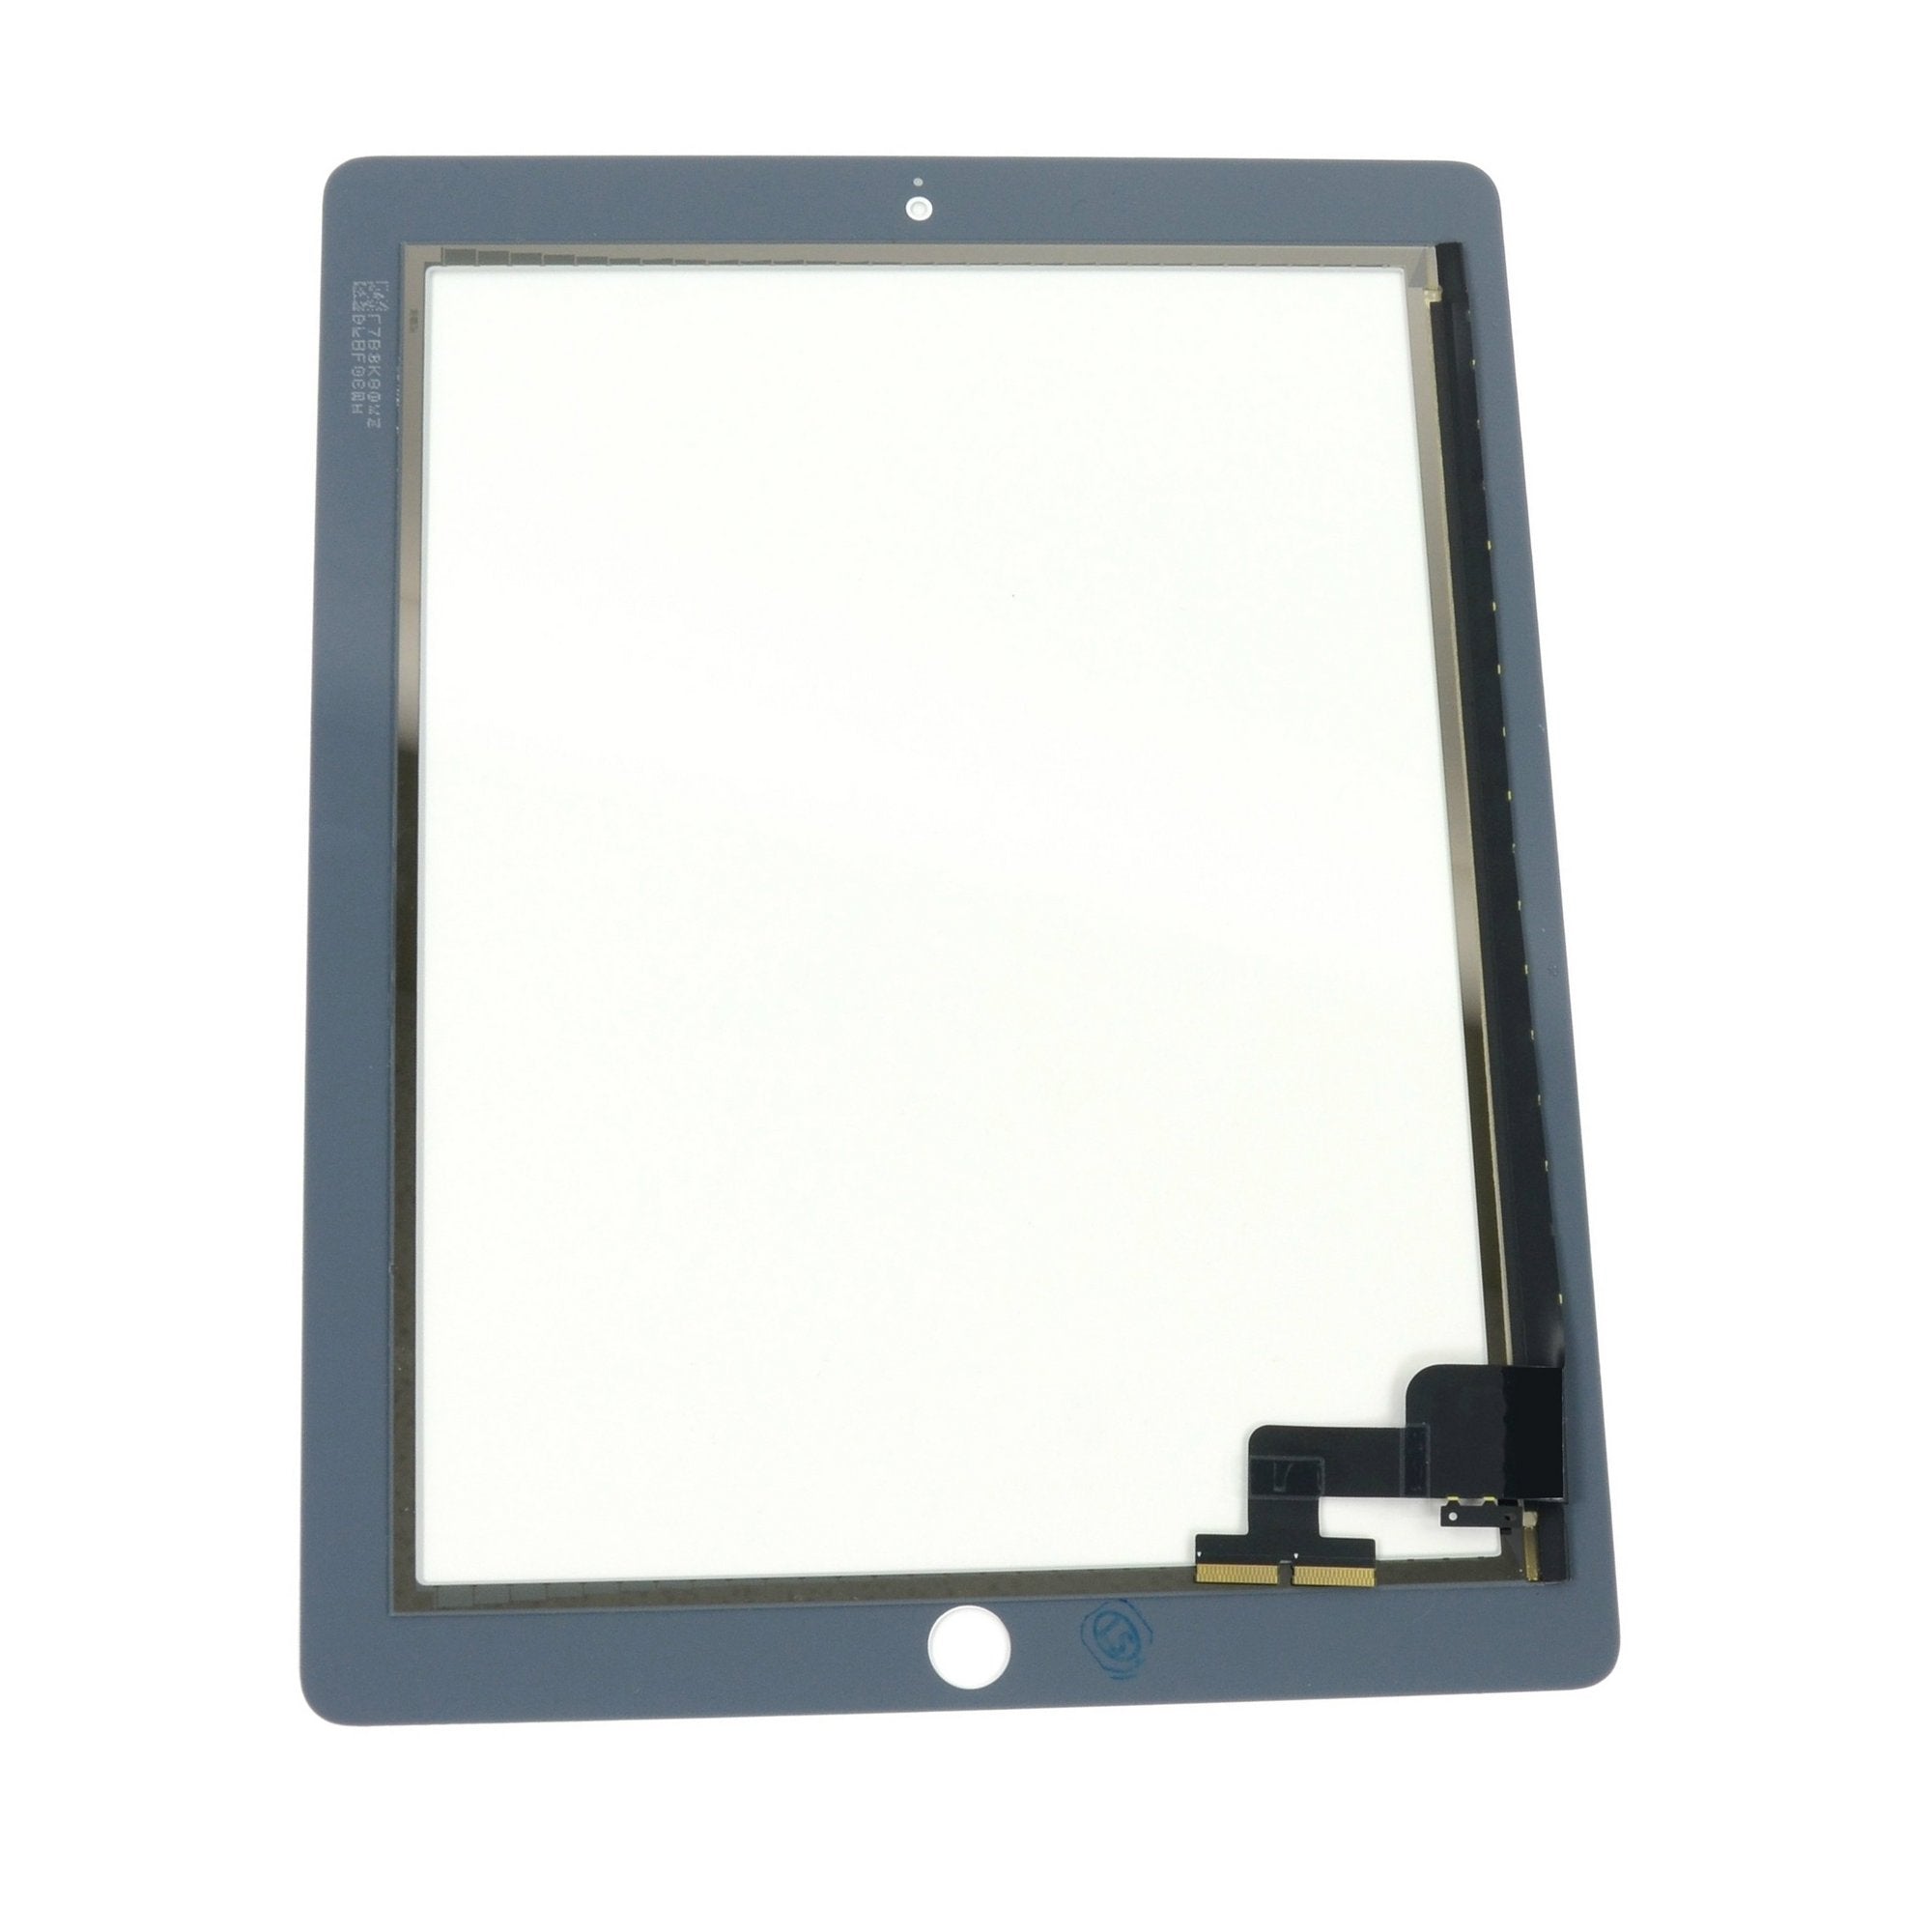 iPad 2 Screen Digitizer White New Part Only